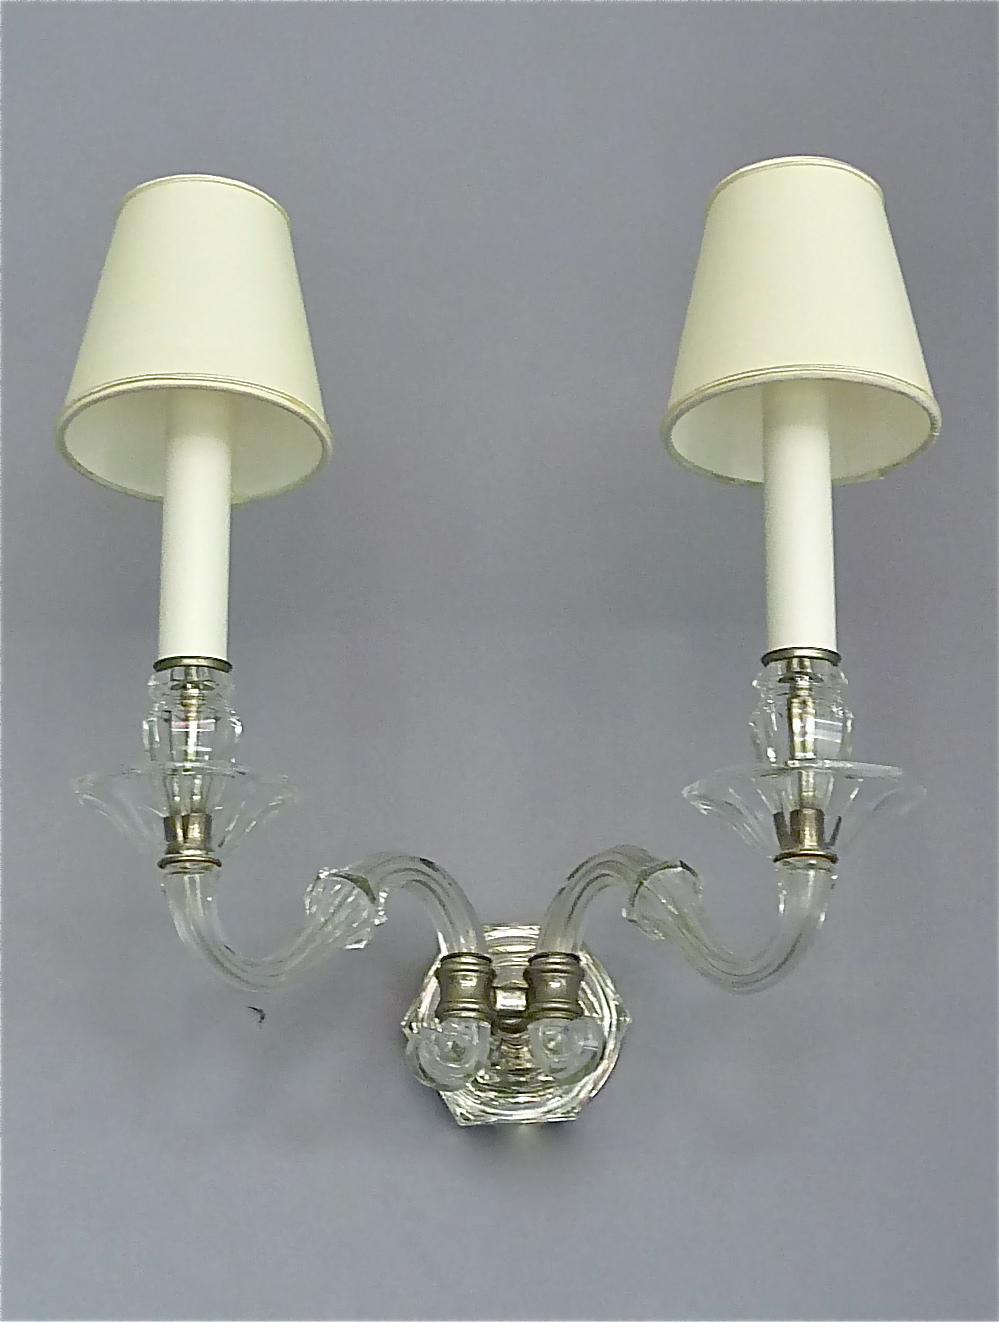 Pair of Art Deco Faceted Crystal Glass Wall Lights Sconces 1920, Baccarat Style 5